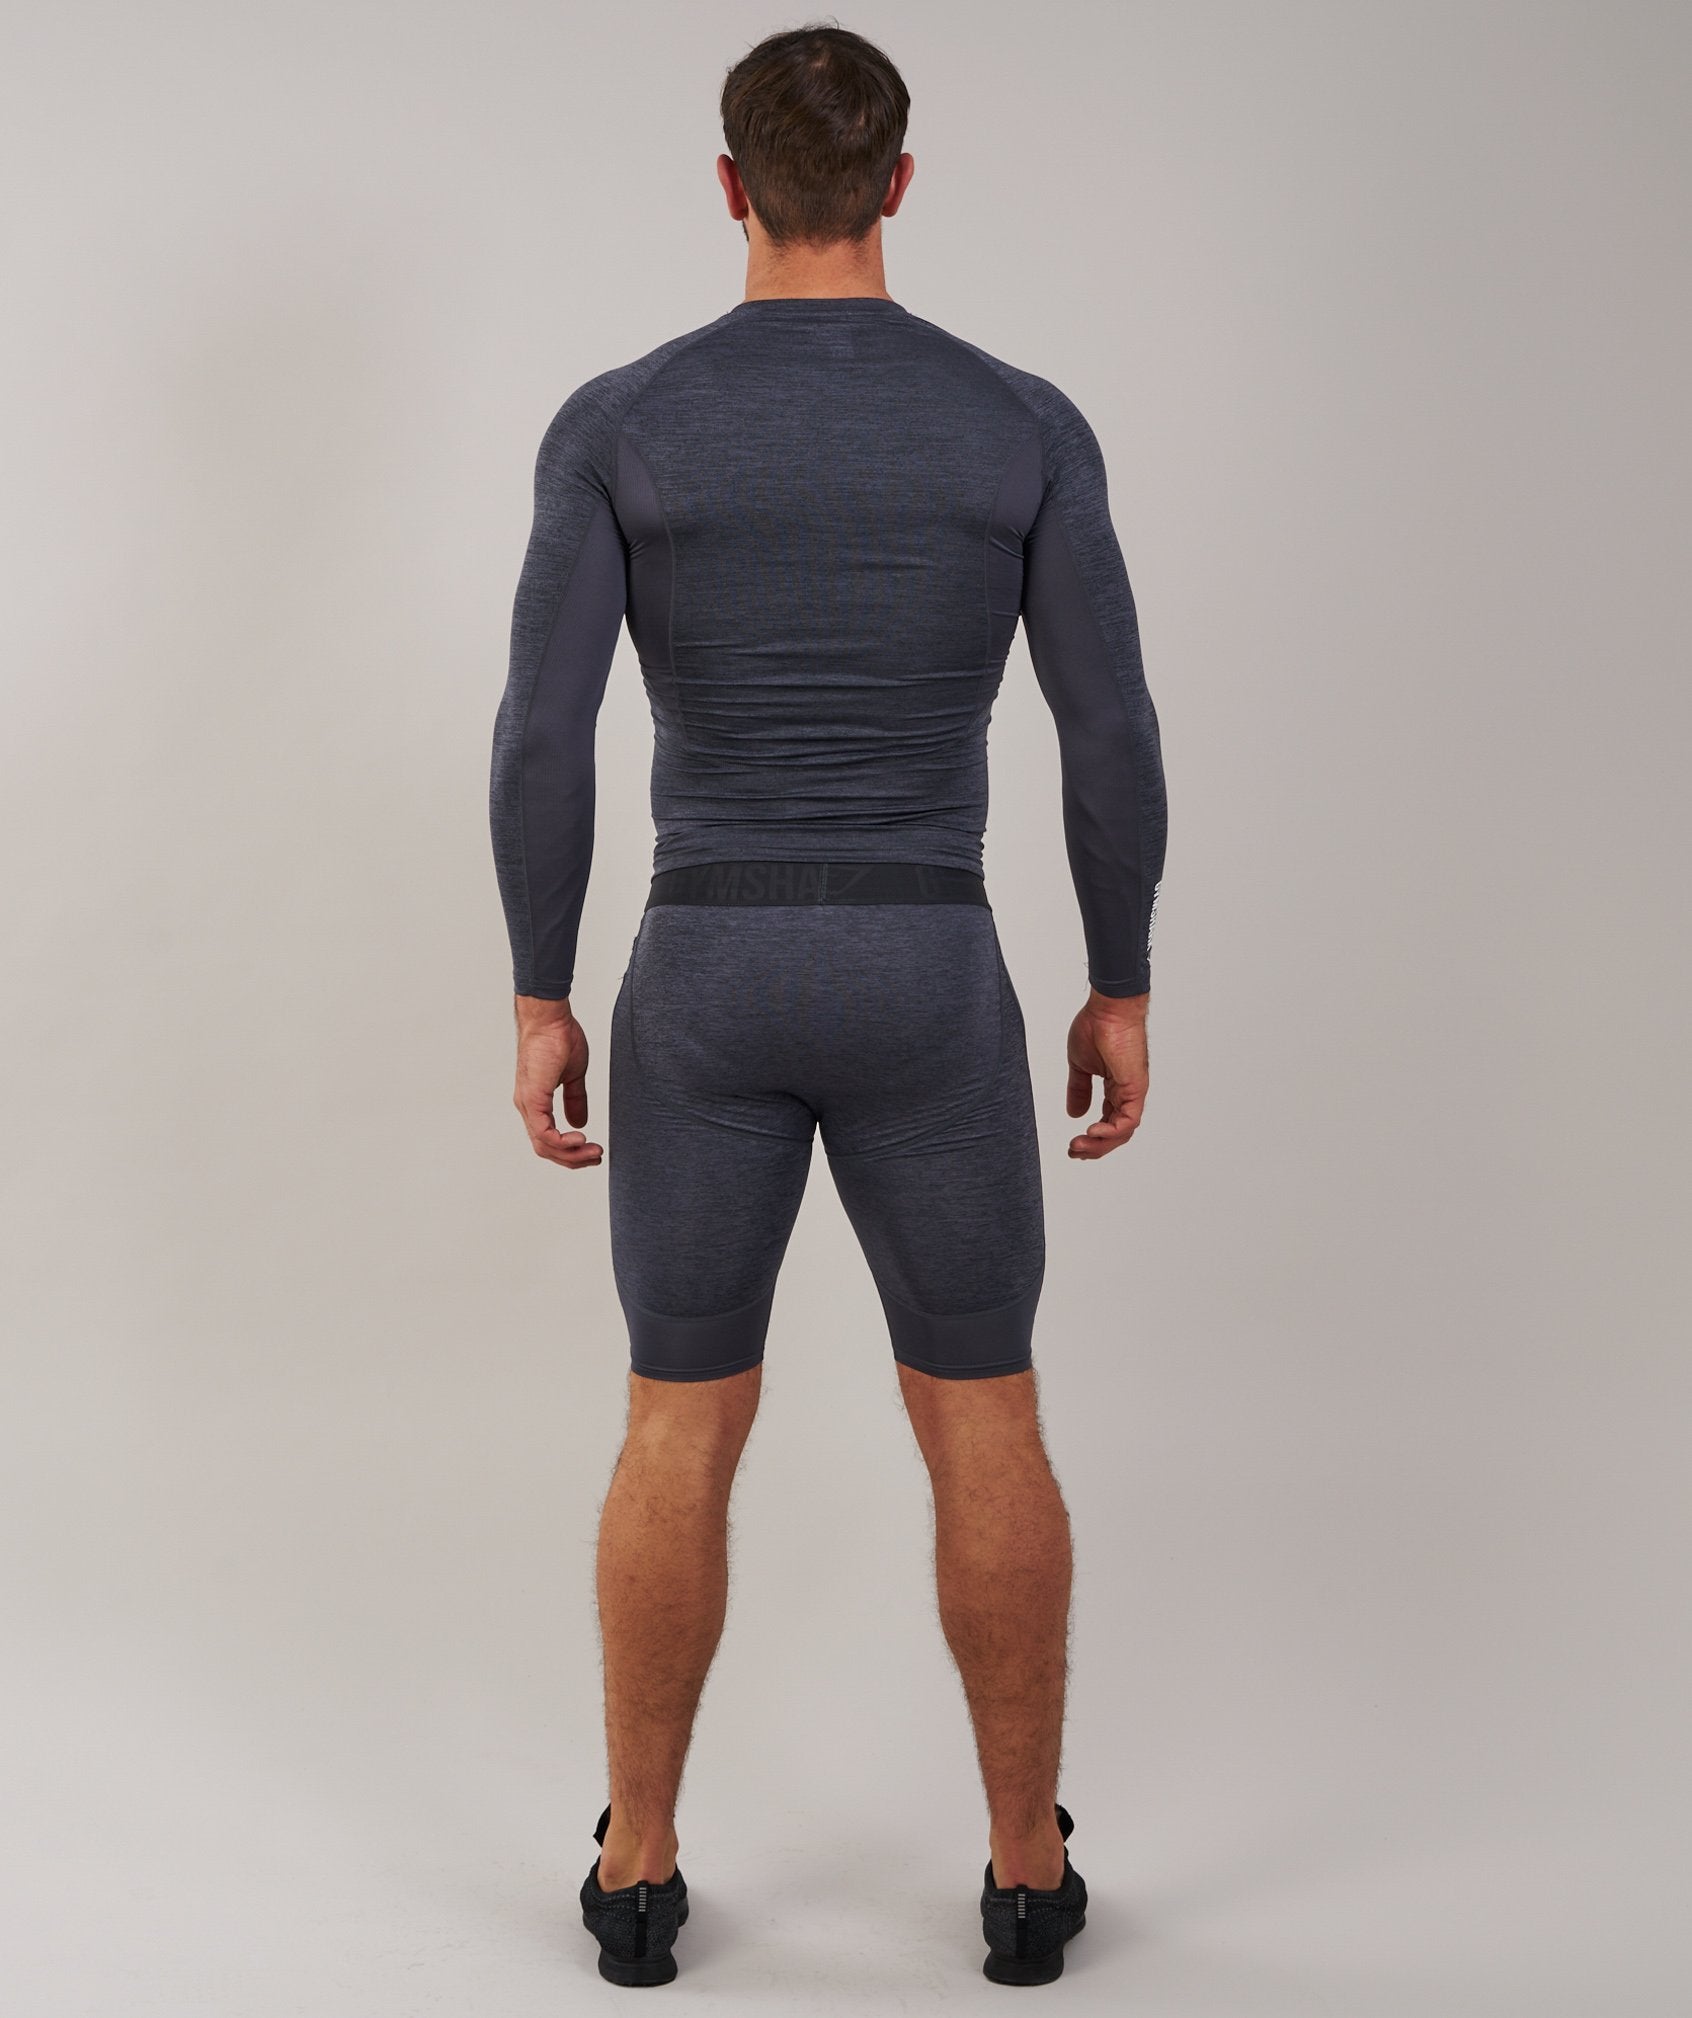 Element Baselayer Shorts in Charcoal Marl - view 2